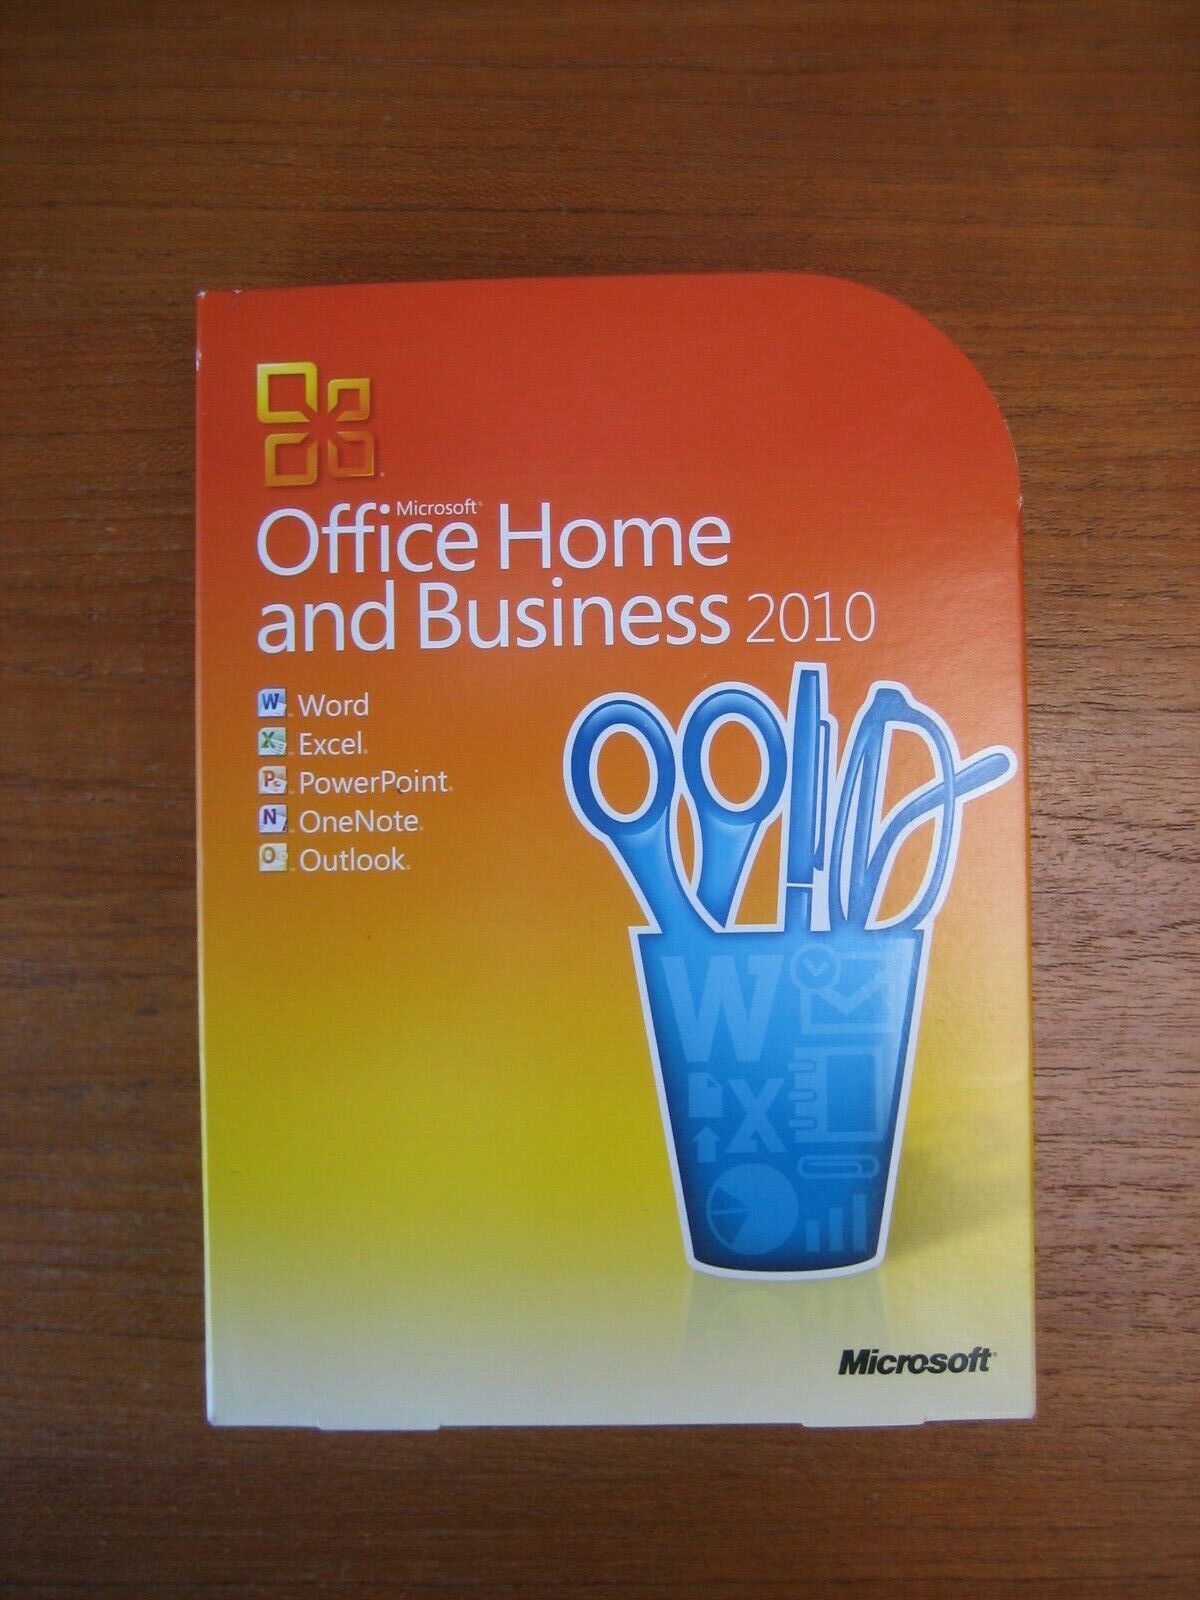 2010 Microsoft Office Home and Business WORD, Excel, Powerpoint, Onenote, Oulook